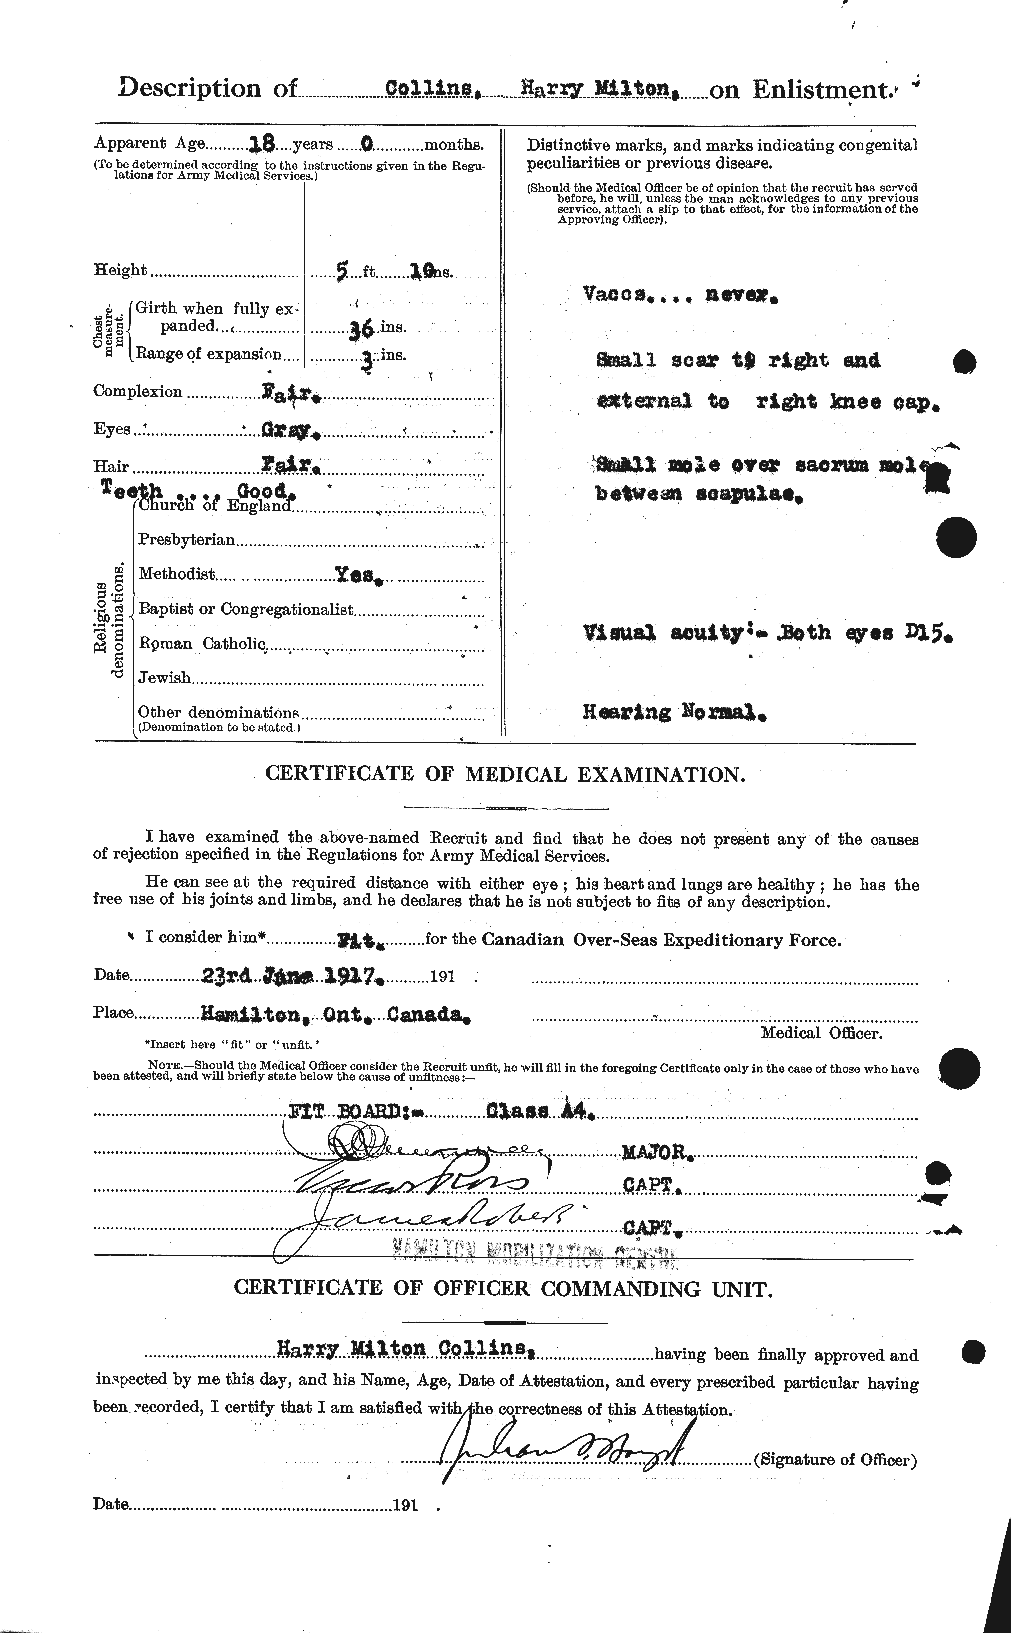 Personnel Records of the First World War - CEF 070015b